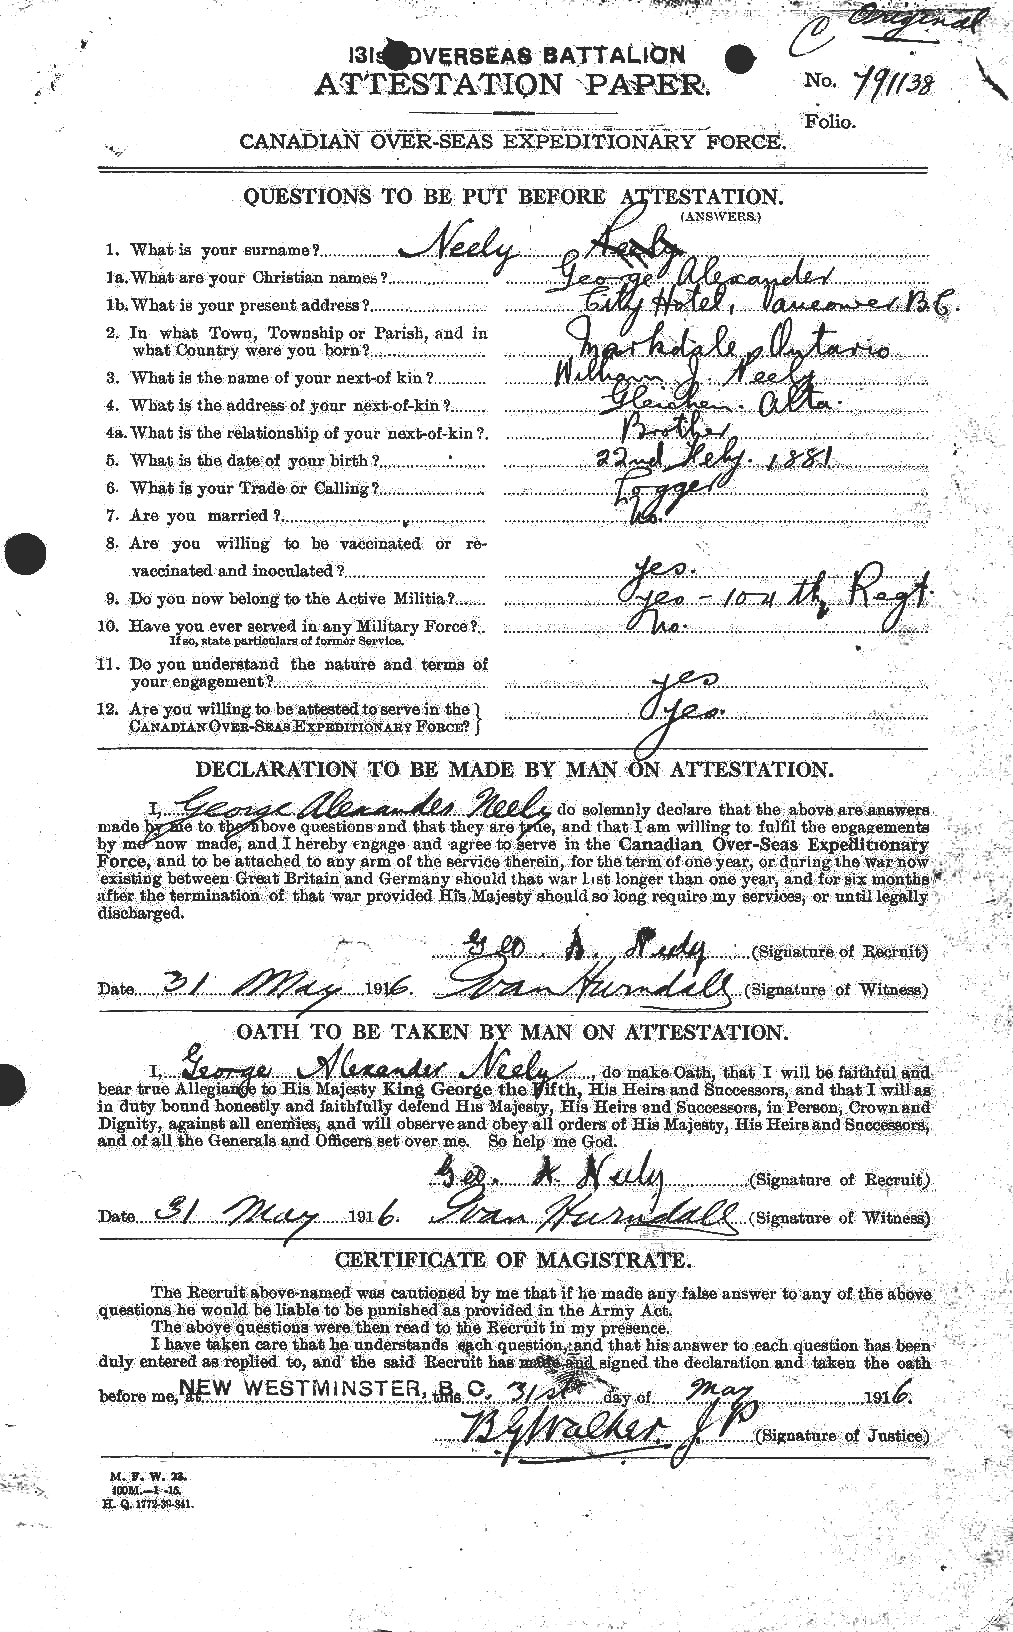 Attestation record: George Alexander Neely